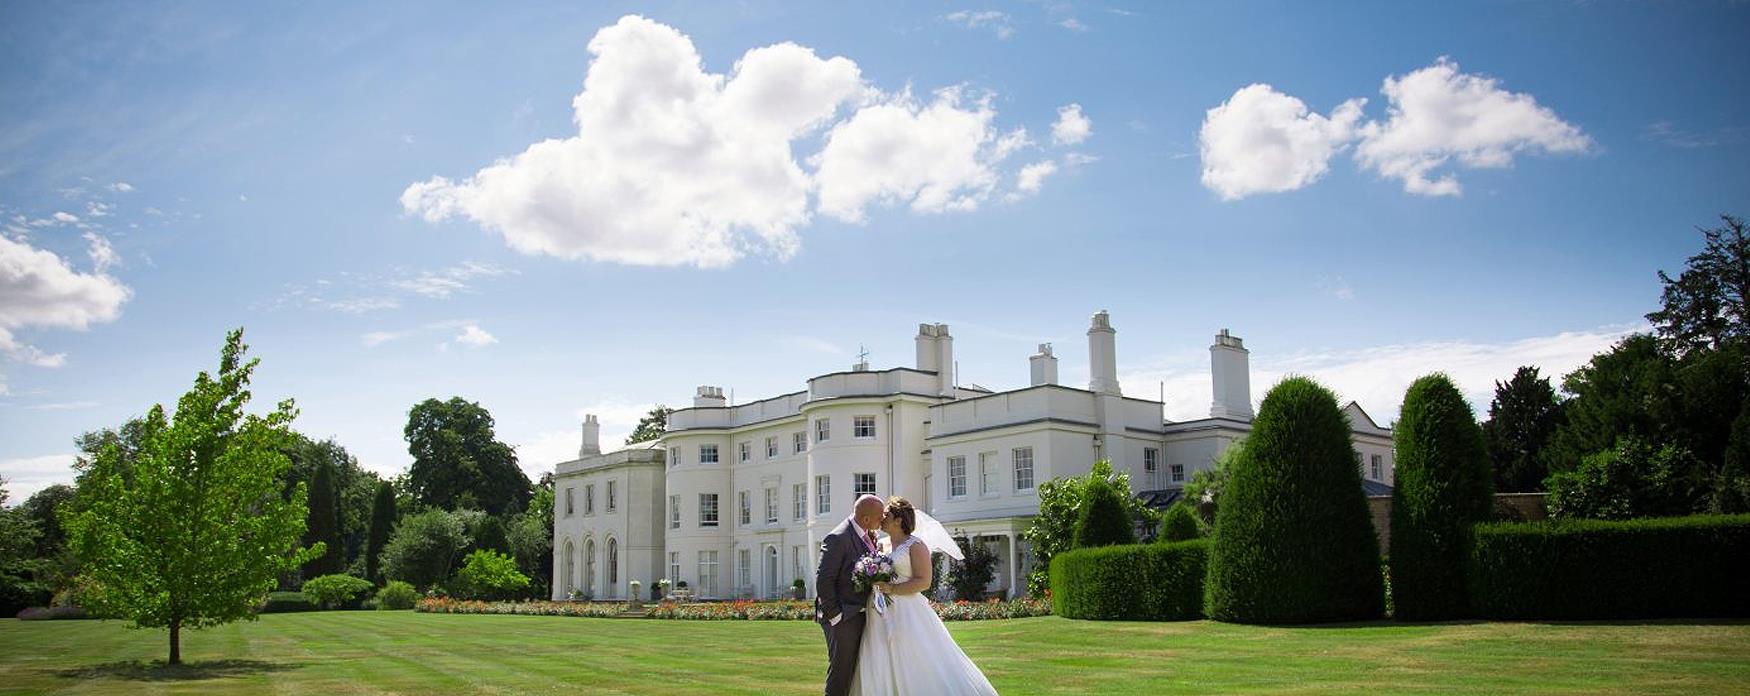 Blake Hall, one of the numerous amazing country wedding venues within the Epping Forest District.